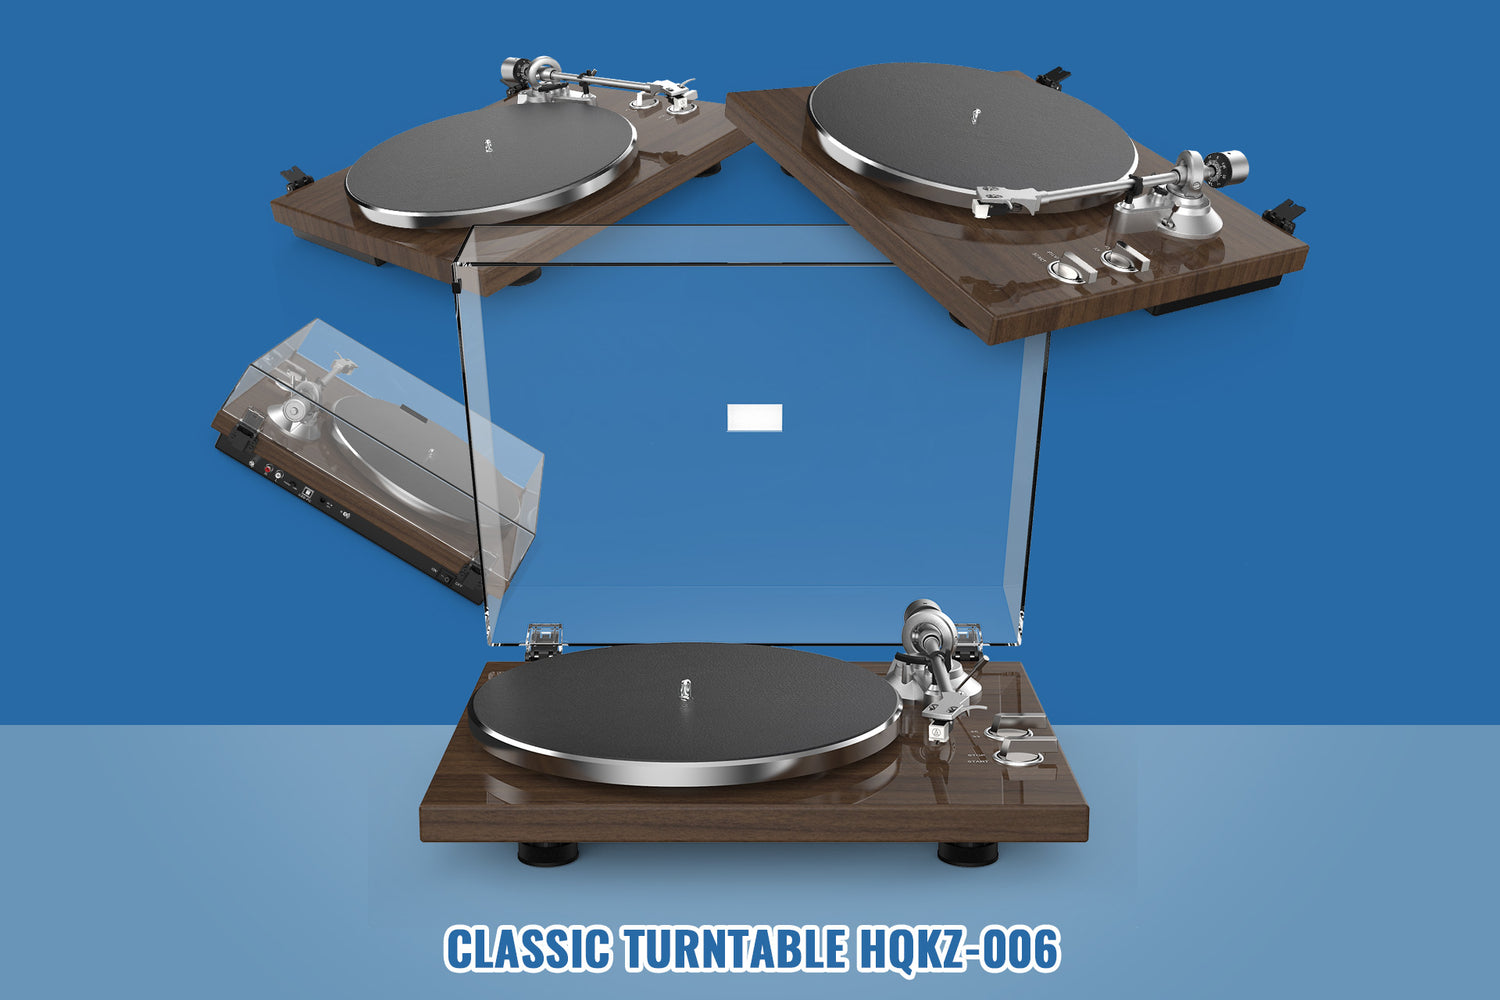 Learn About Audio Keeper‘s Classic Turntable HQKZ-006